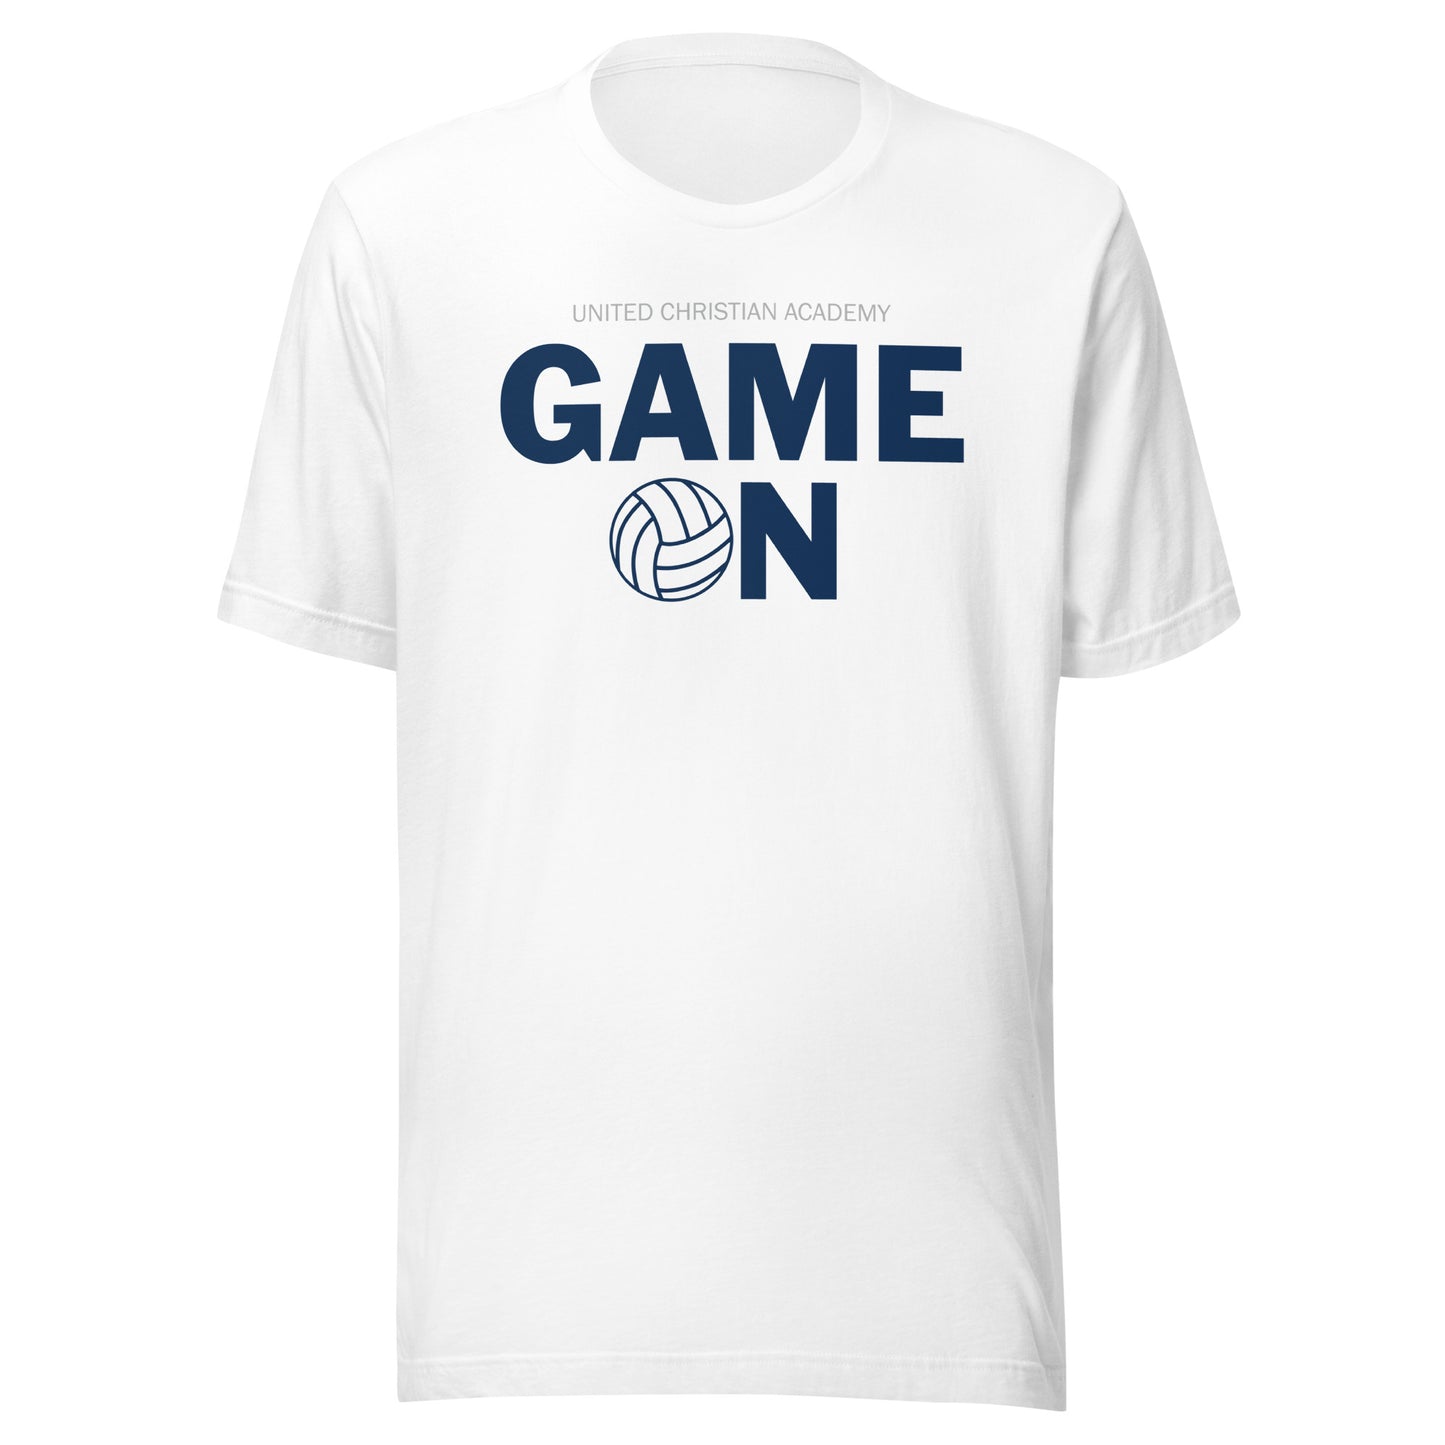 Game On Volleyball T-Shirt